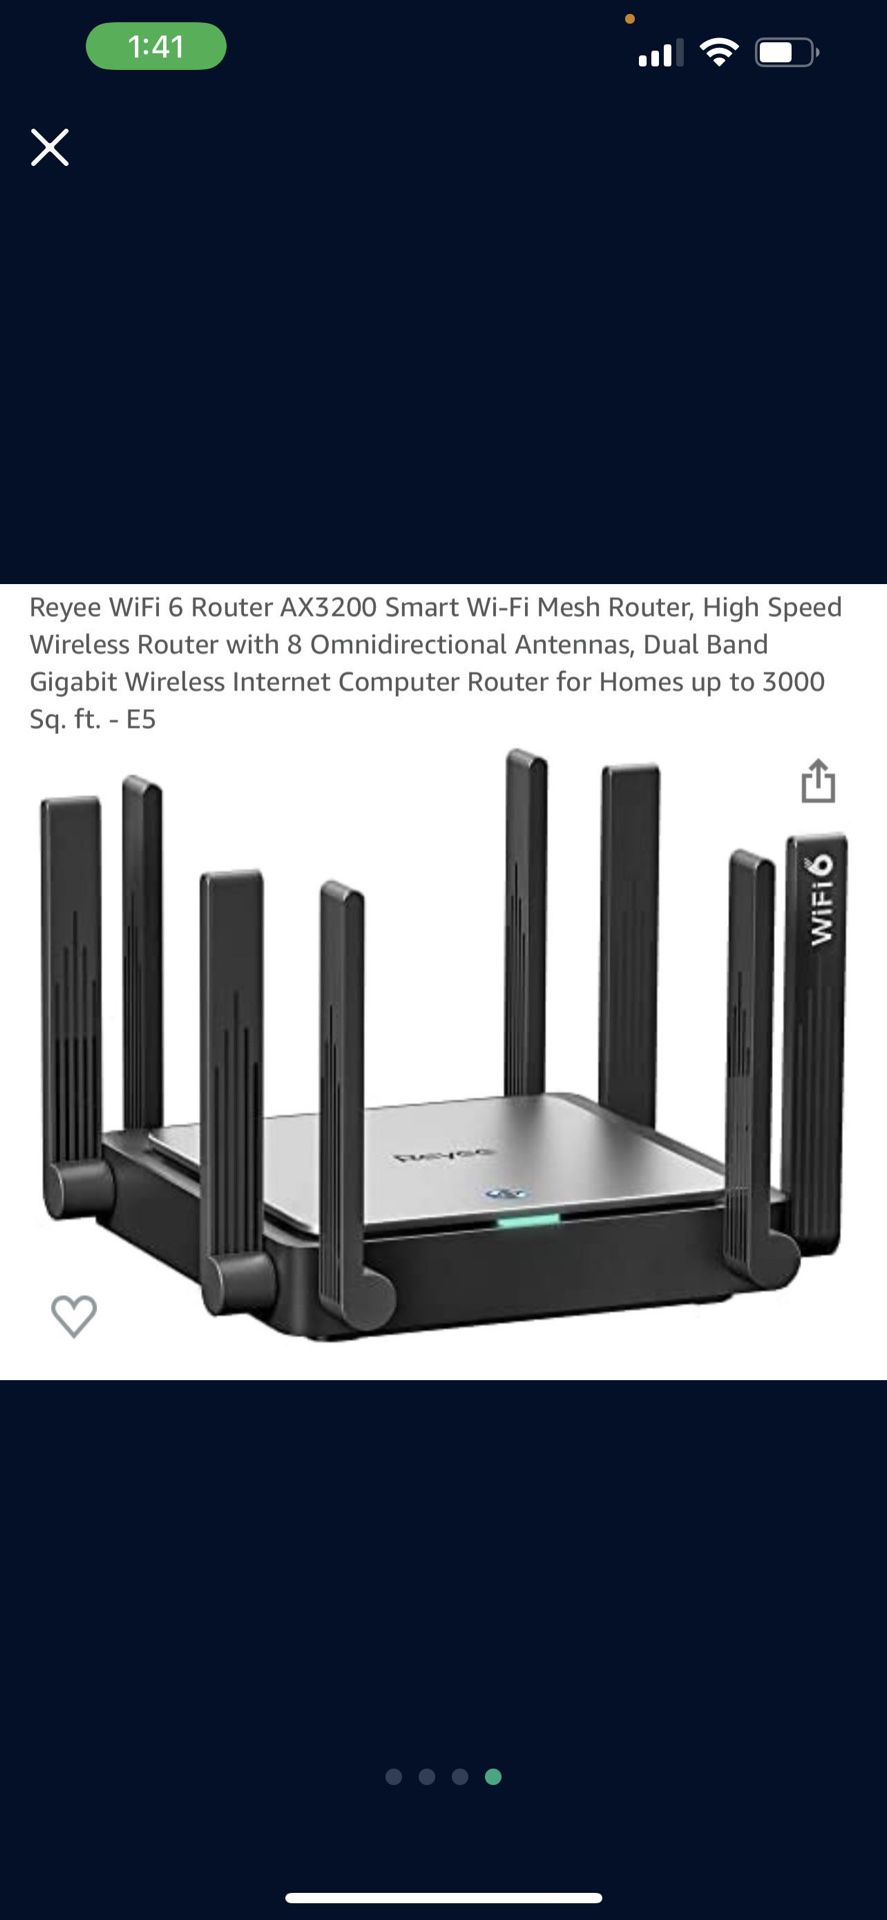 Reyee WiFi 6 Router AX3200 Smart Wi-Fi Mesh Router, High Speed Wireless Router with 8 Omnidirectional Antennas